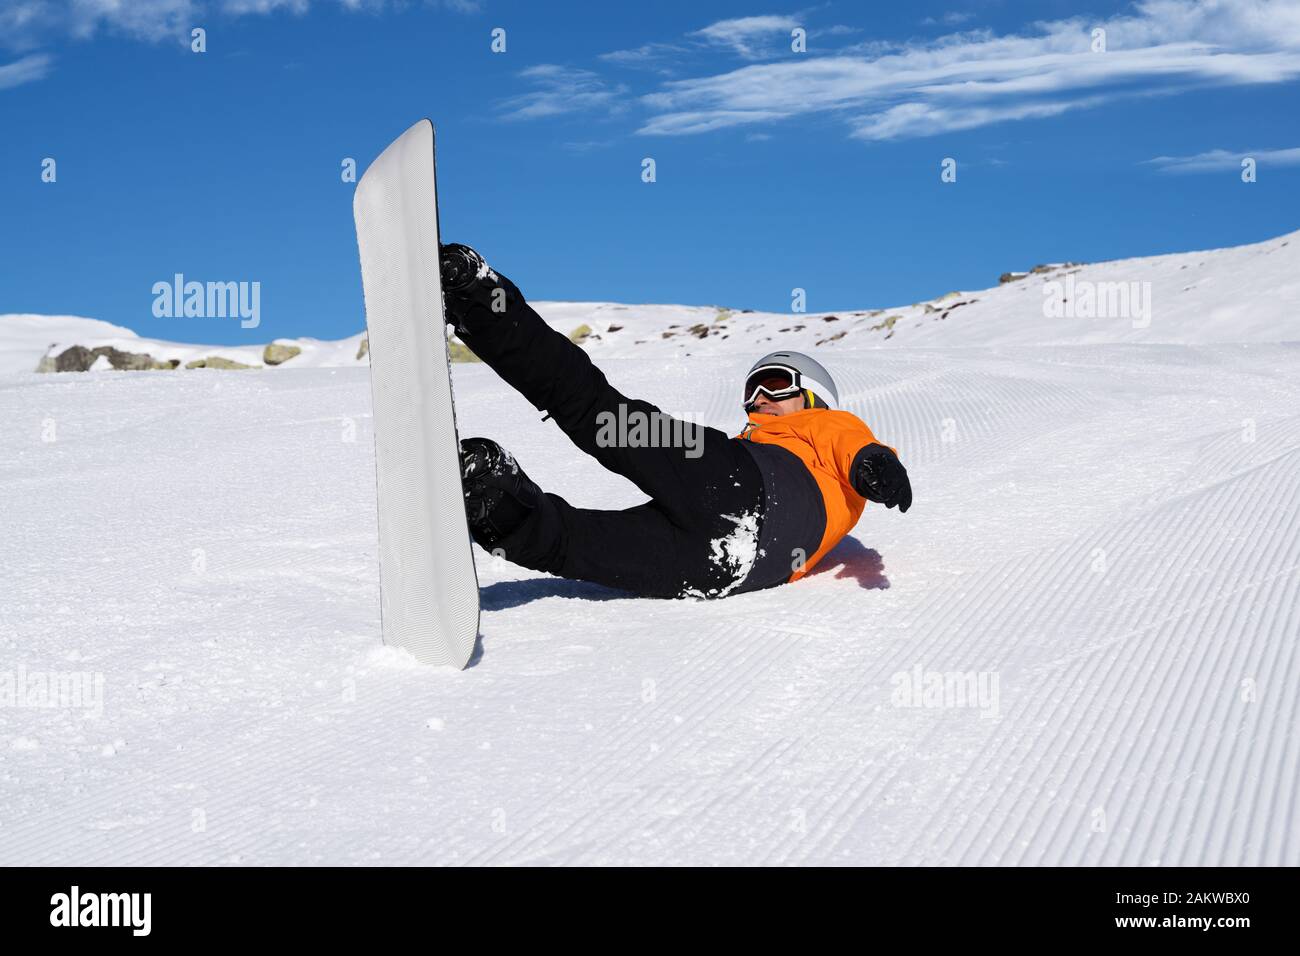 A Man In Orange Jacket Fall Down While Riding Snow Board On Snow Track Stock Photo